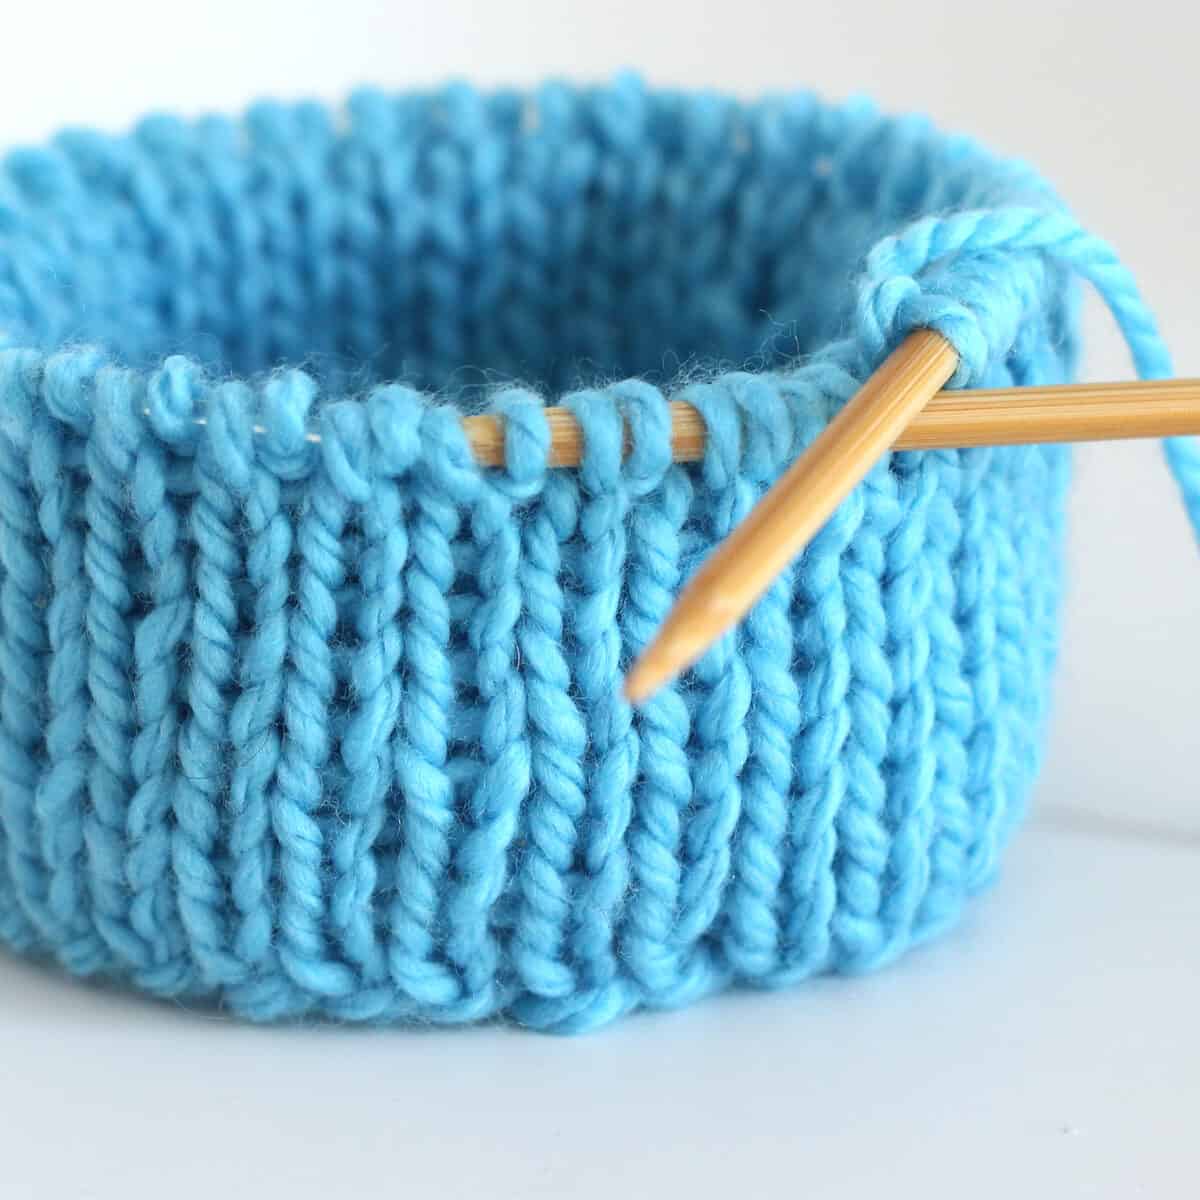 Double Stockinette stitch knitted in the round on circular needles in blue color yarn.